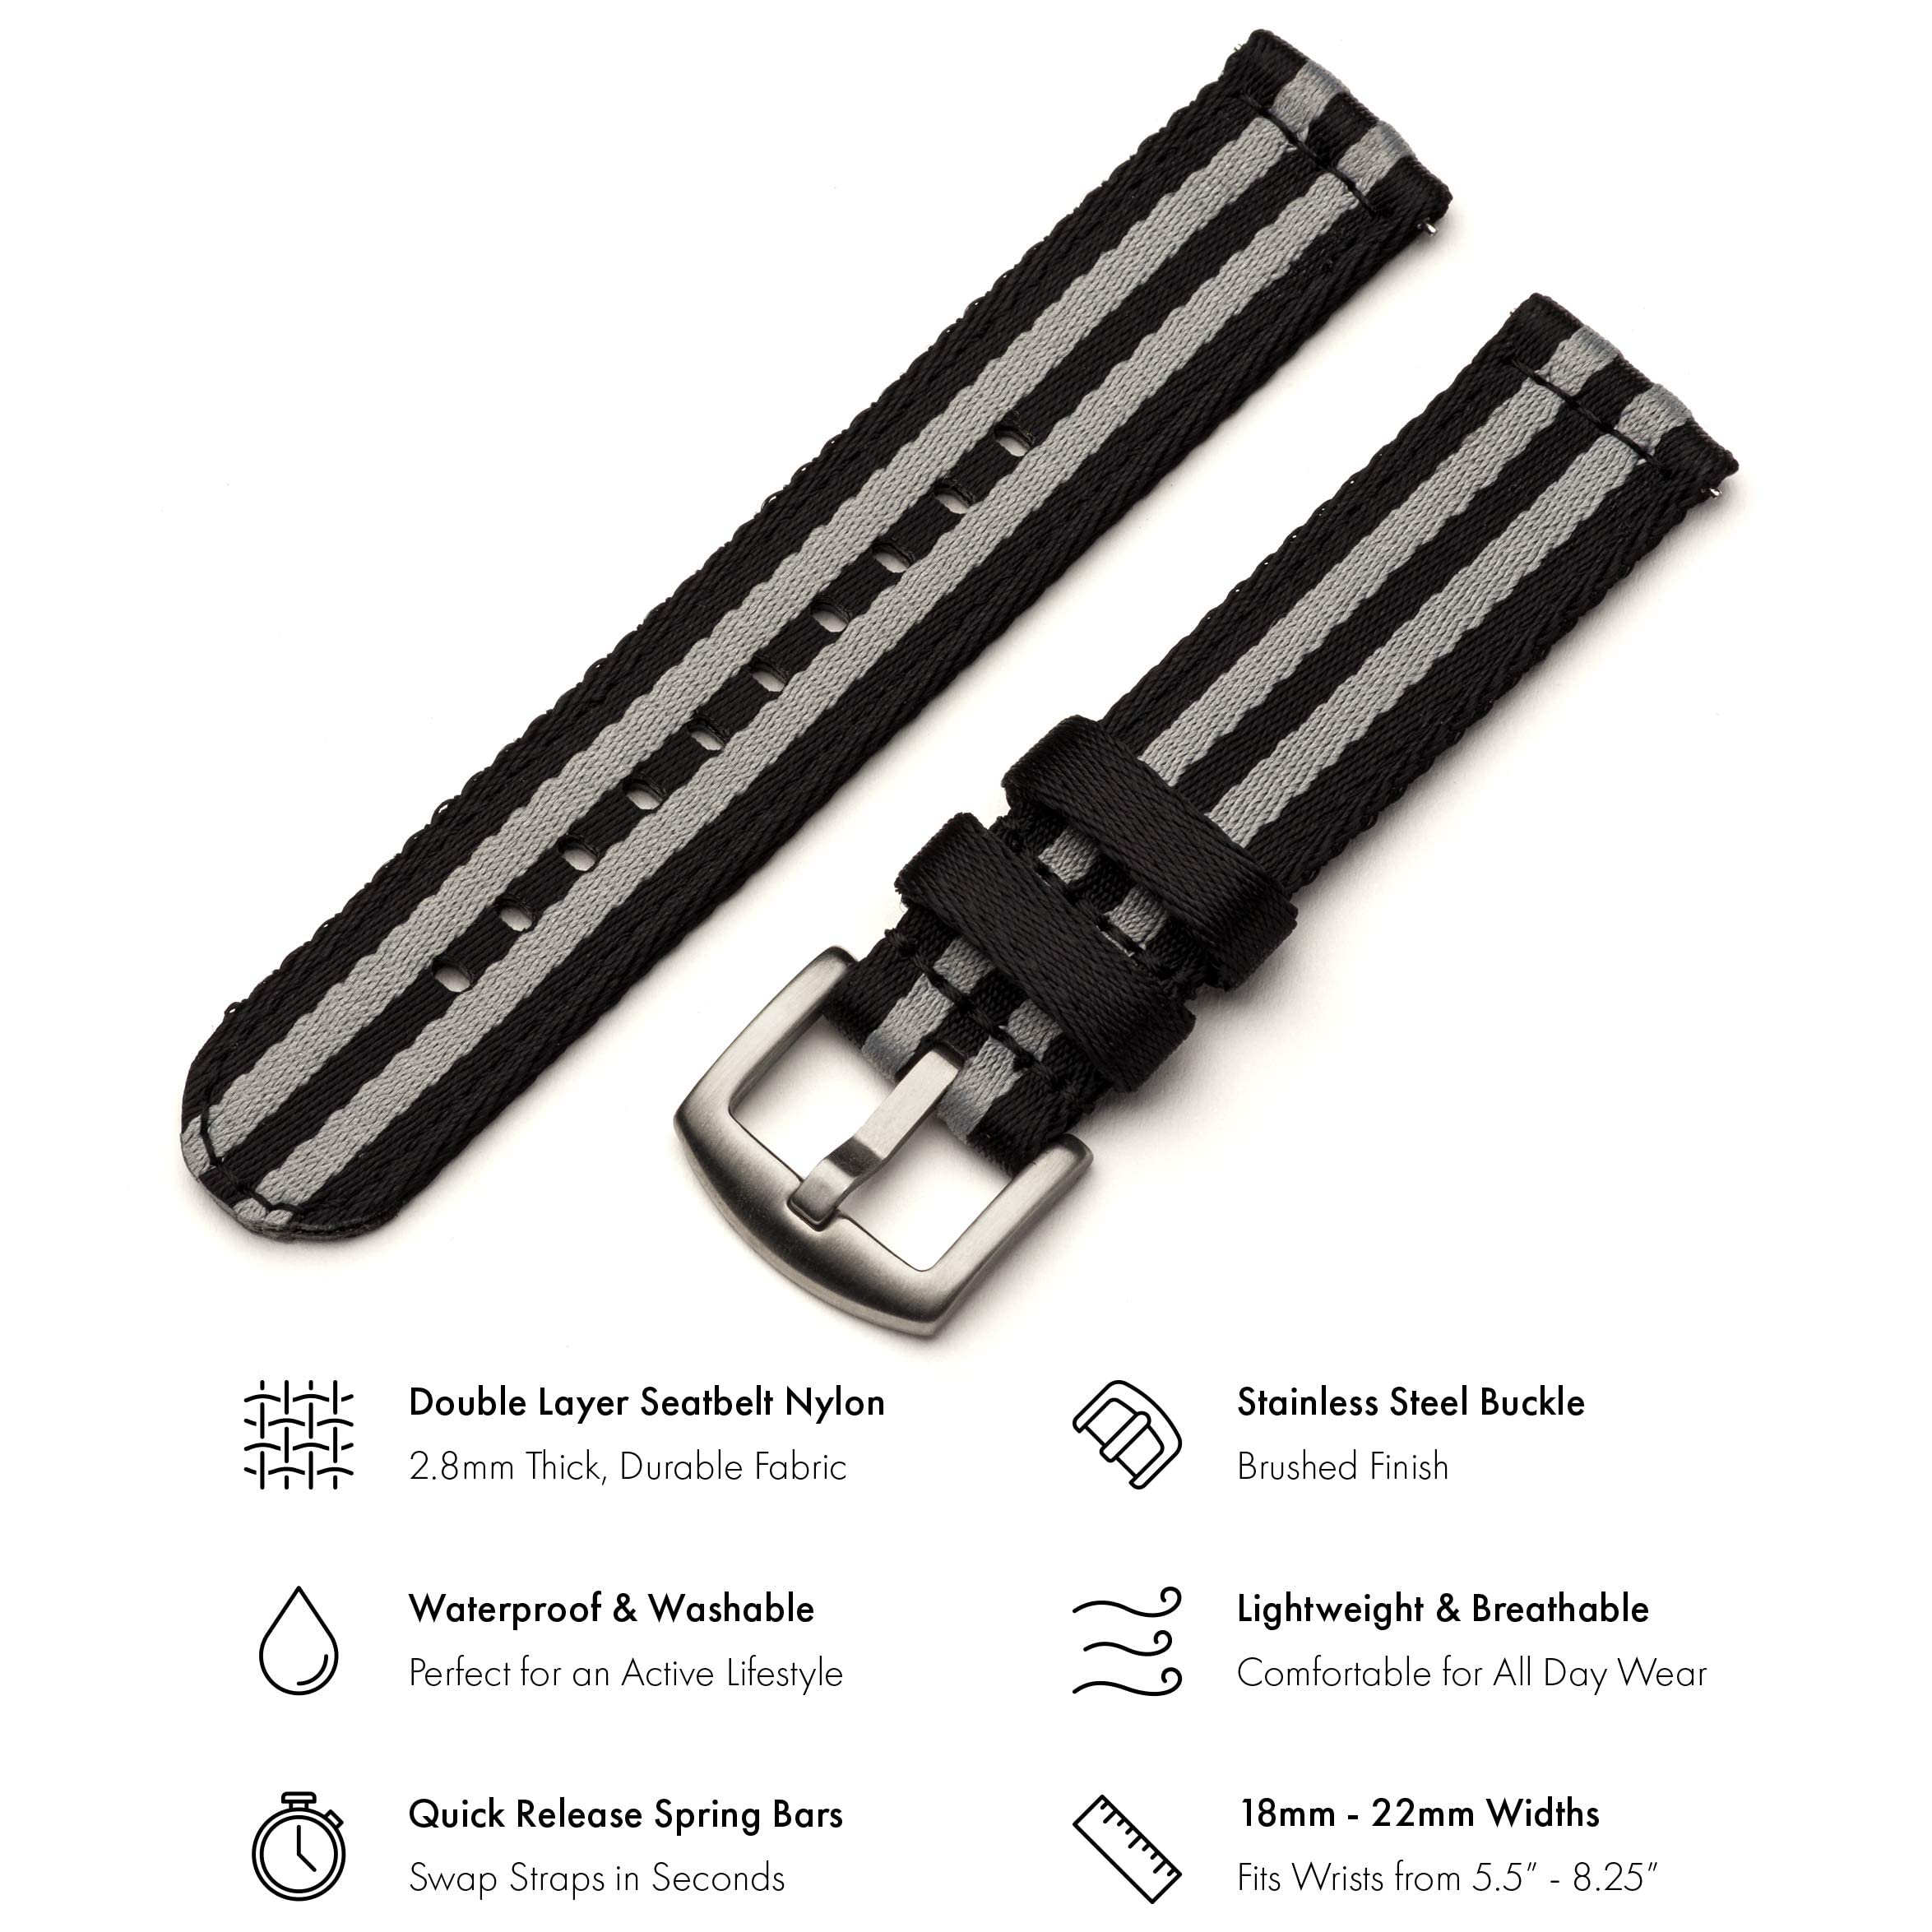 Benchmark Basics Quick Release Watch Band - Premium Waterproof Seatbelt Nylon Watch Straps for Men and Women - Compatible with Regular & Smart Watches - Choice of Color & Width - 18mm, 20mm or 22mm